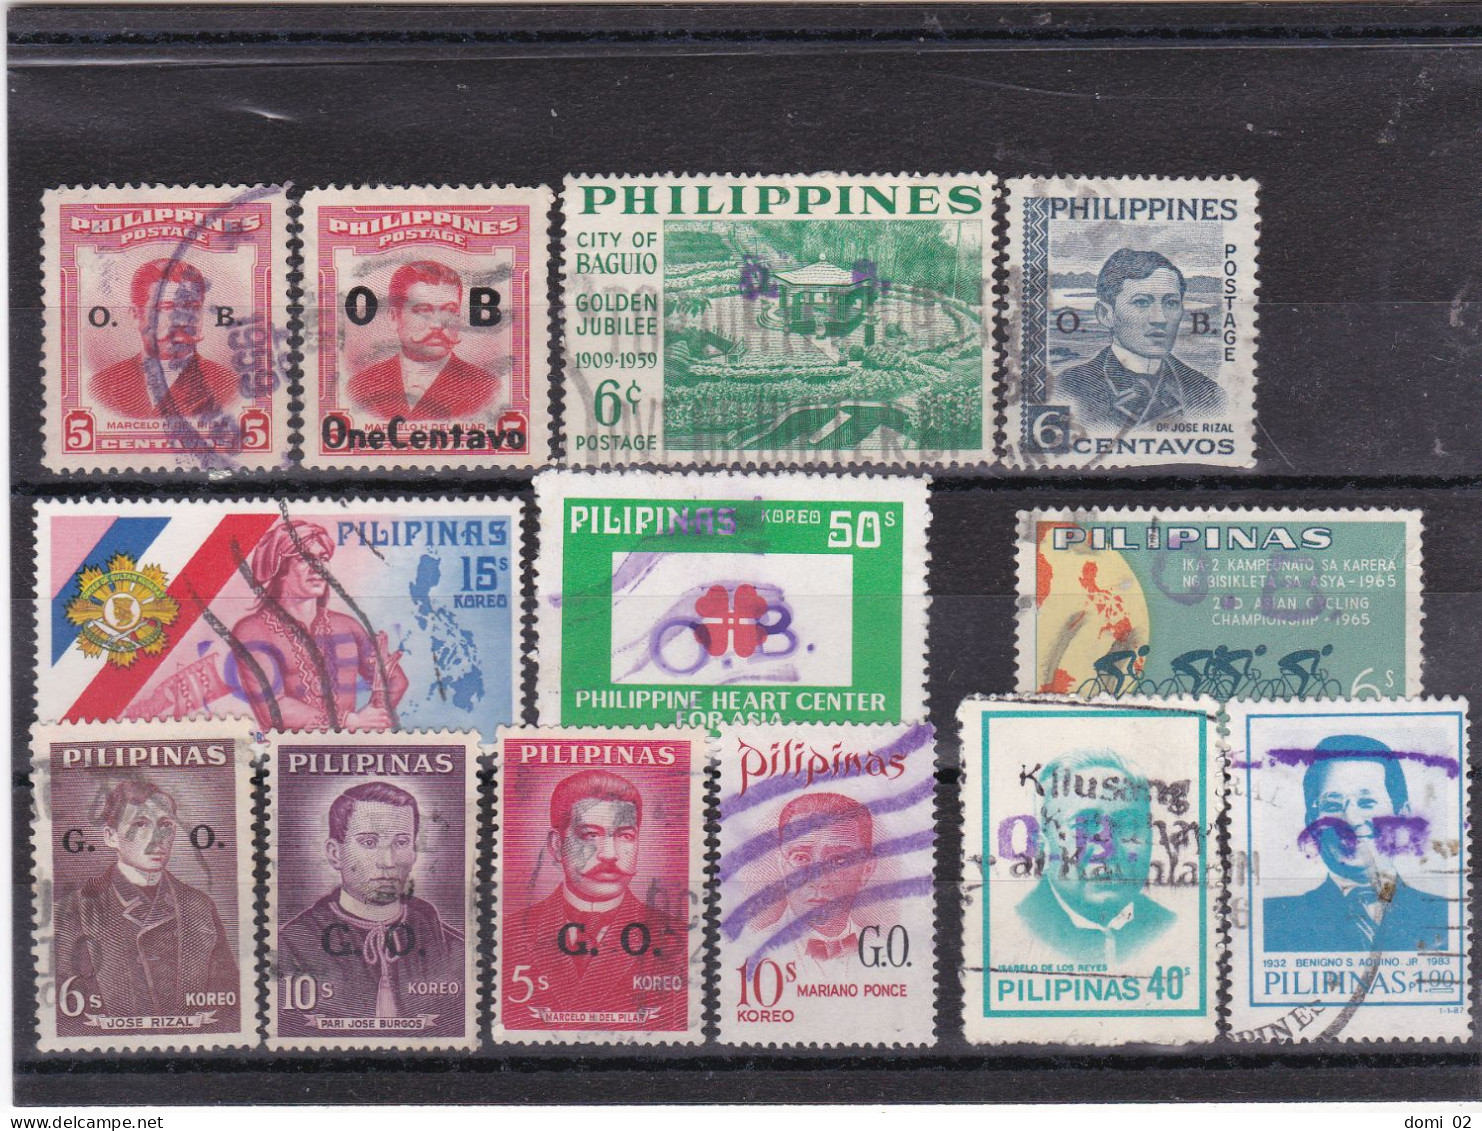 9 TIMBRES SURCHAGES OB + 4 TIMBRES SURCHAGES GO OBLITERES - Philippines